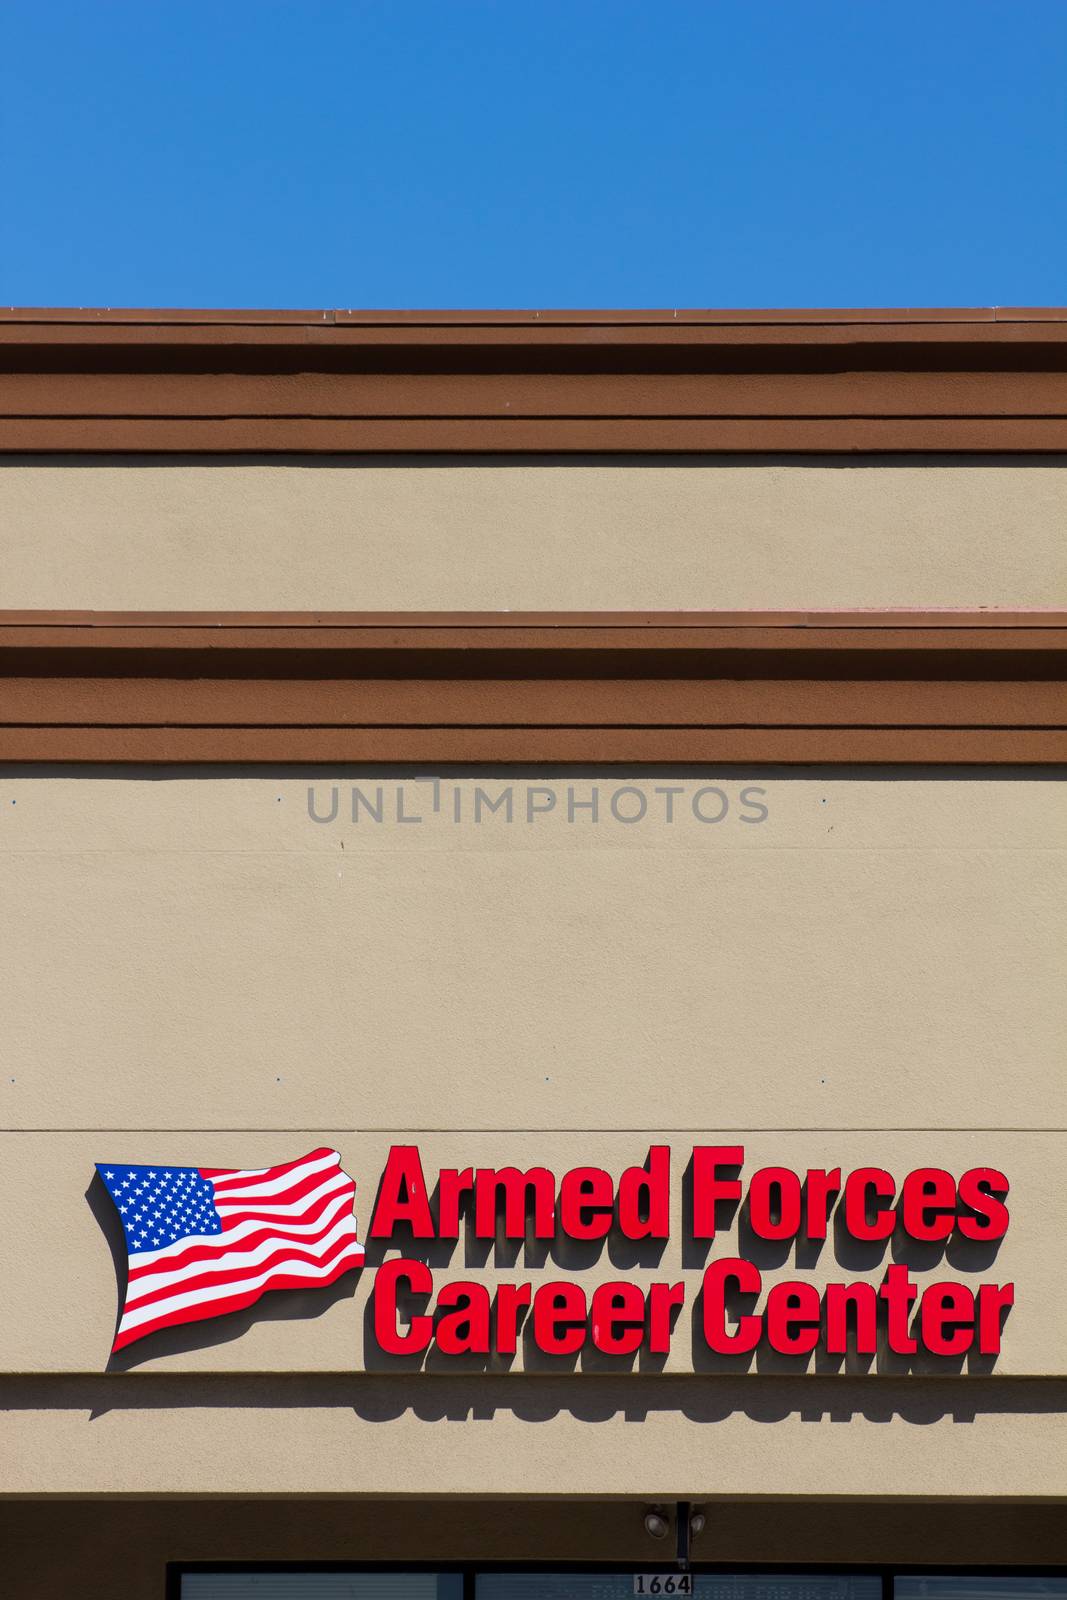 SALINAS, CA/USA - MAY 13, 2014: Armed Forces Career Center. Armed Forces Career Centers recruit and enlist men and women into the United States Armed Forces.